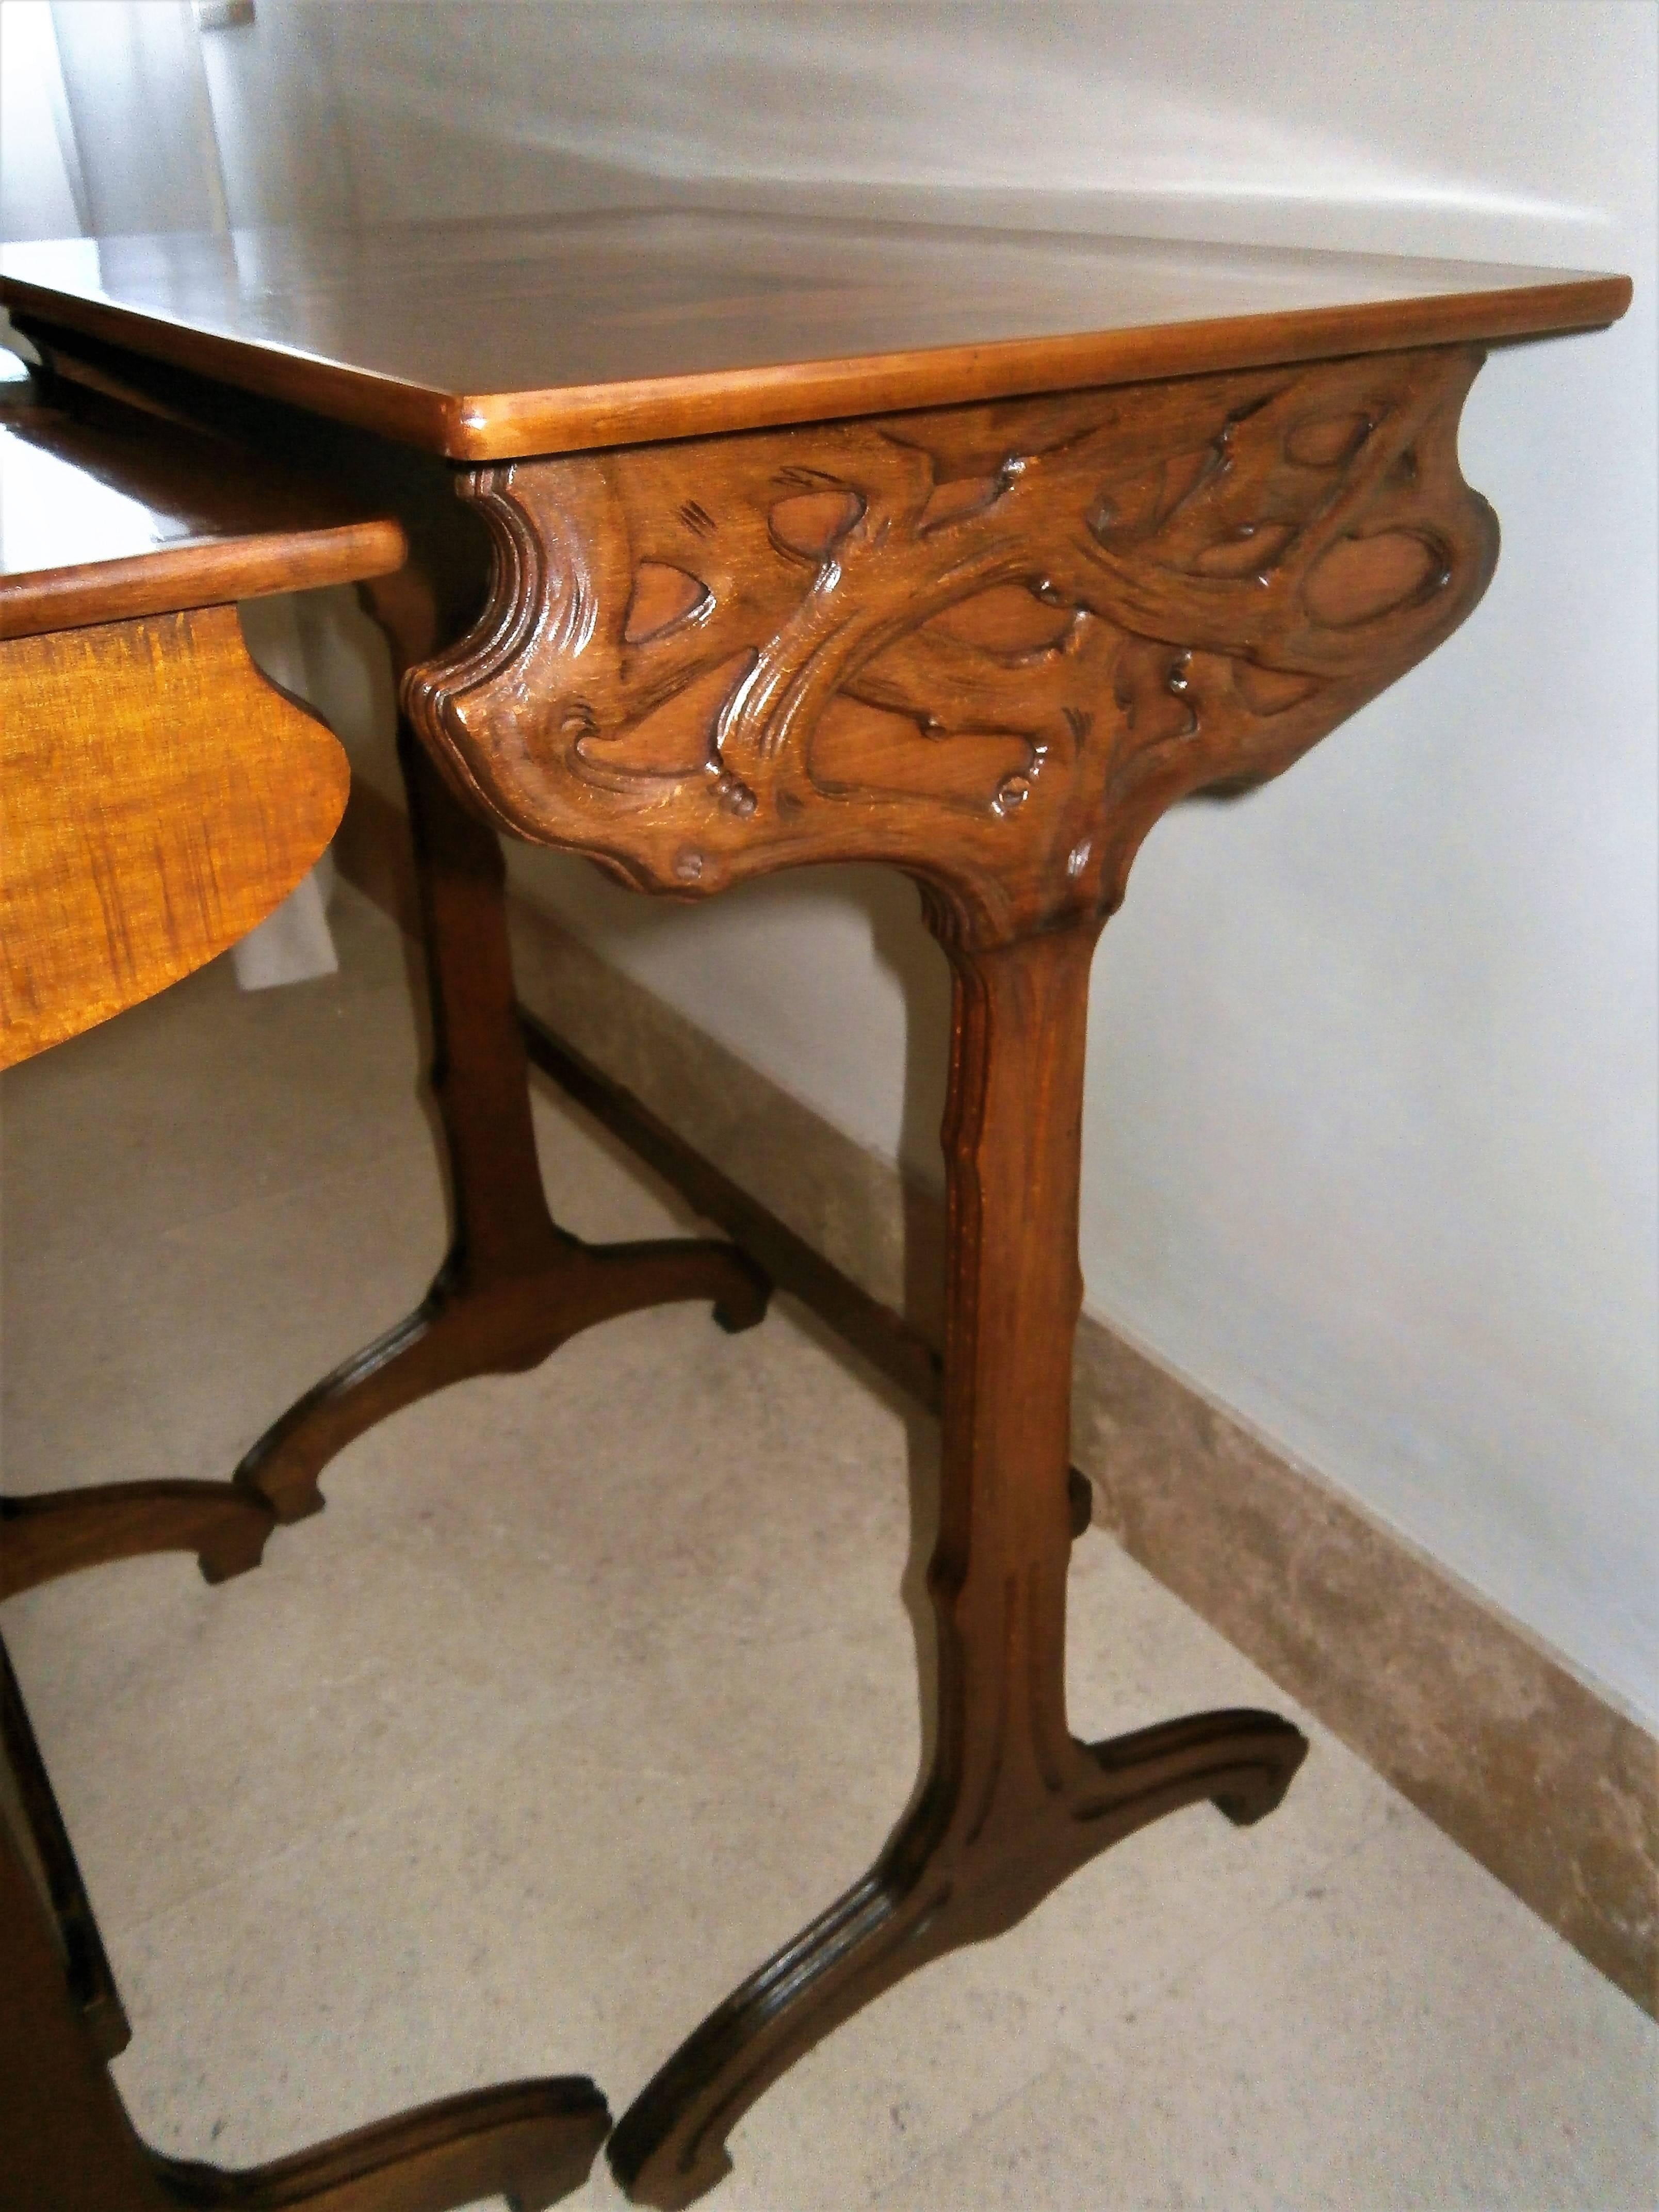 Stunning Art Nouveau Marquetry Nesting Tables Signed by Gallé 1